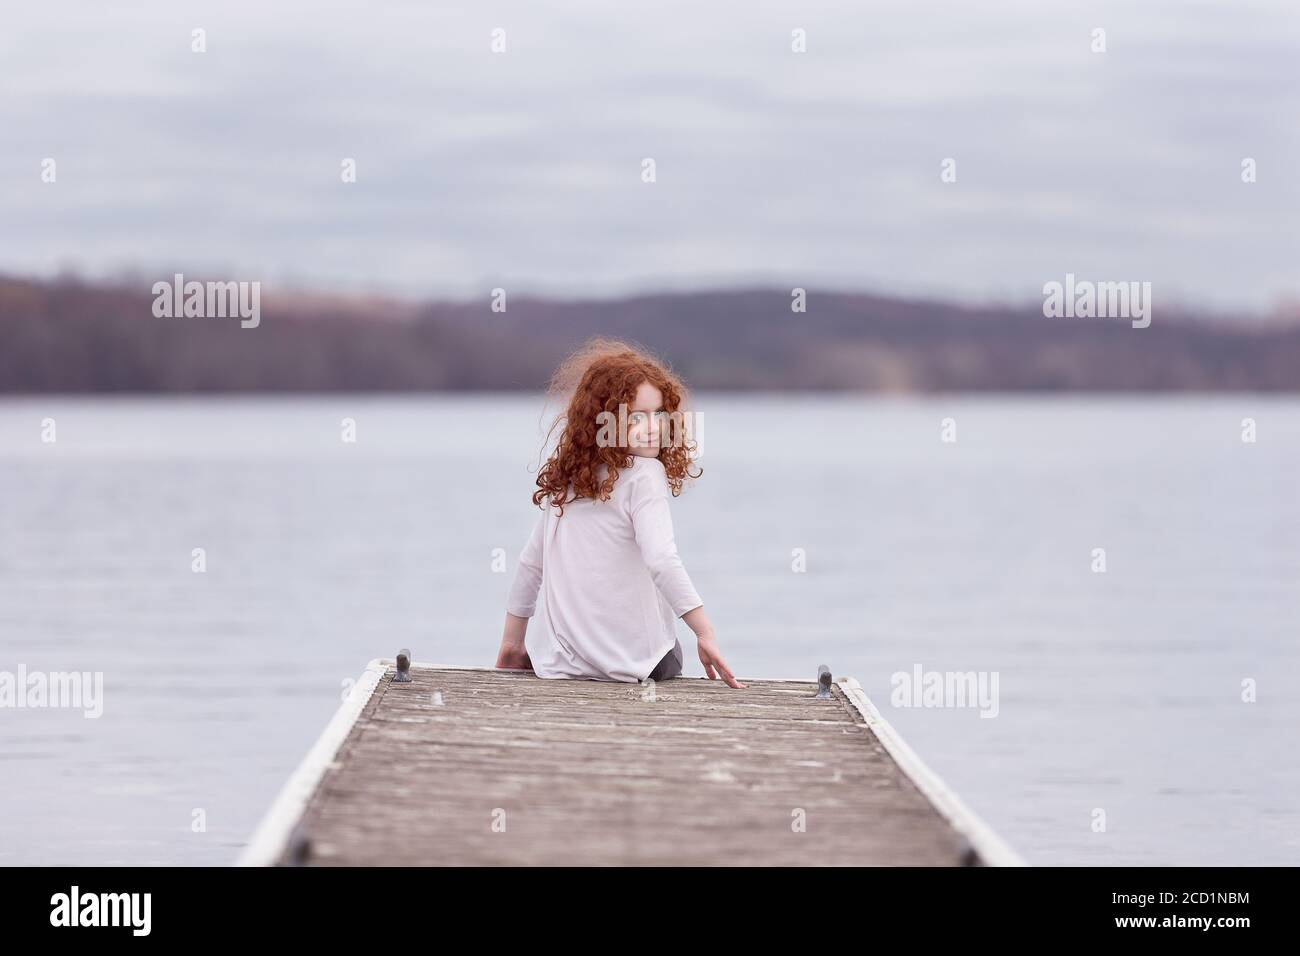 Girl Sitting on a Dock Stock Photo